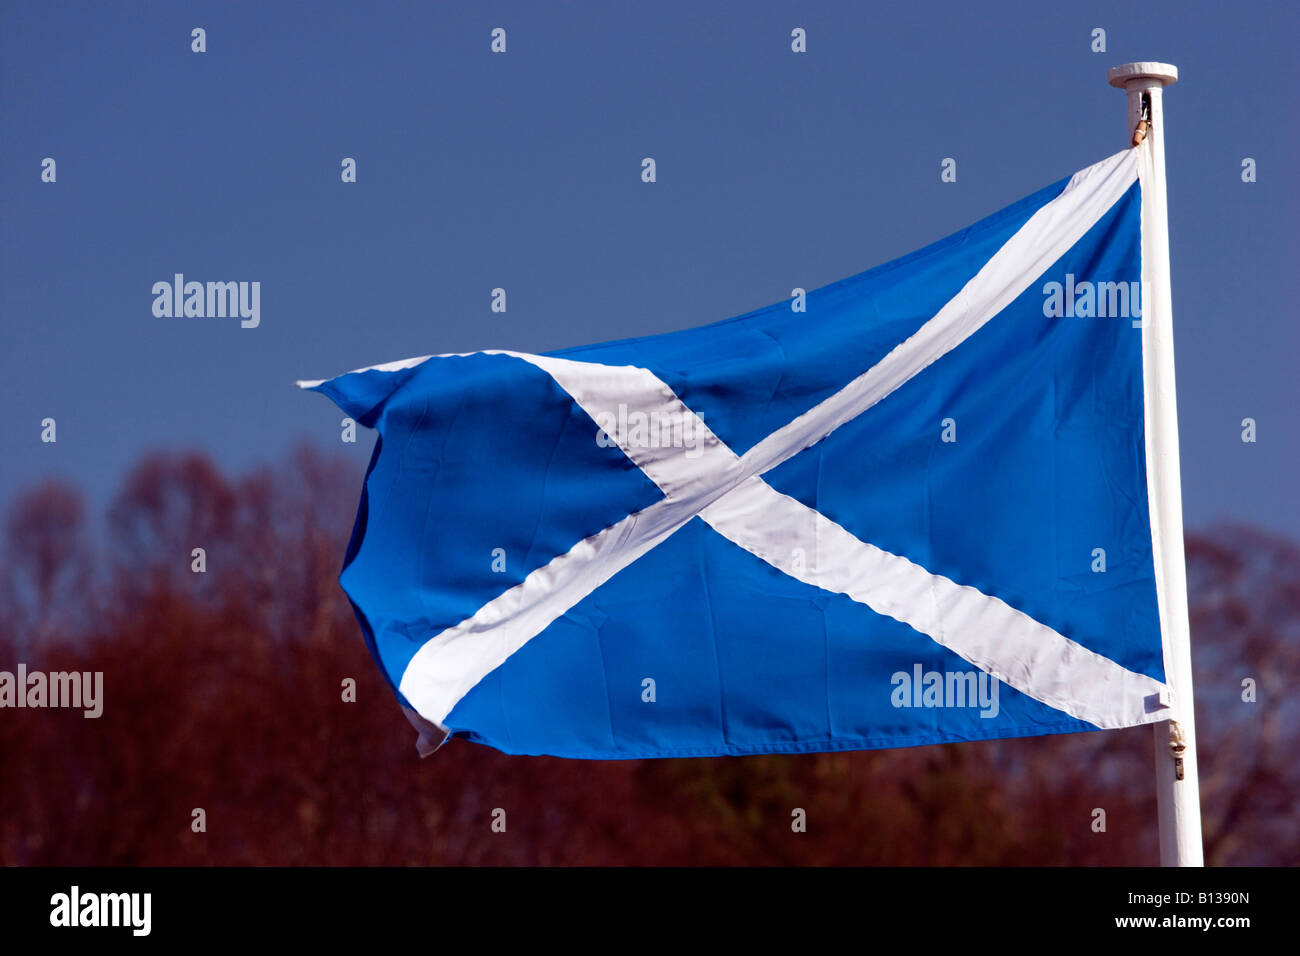 A Scottish flag is blowing in the wind. Stock Photo